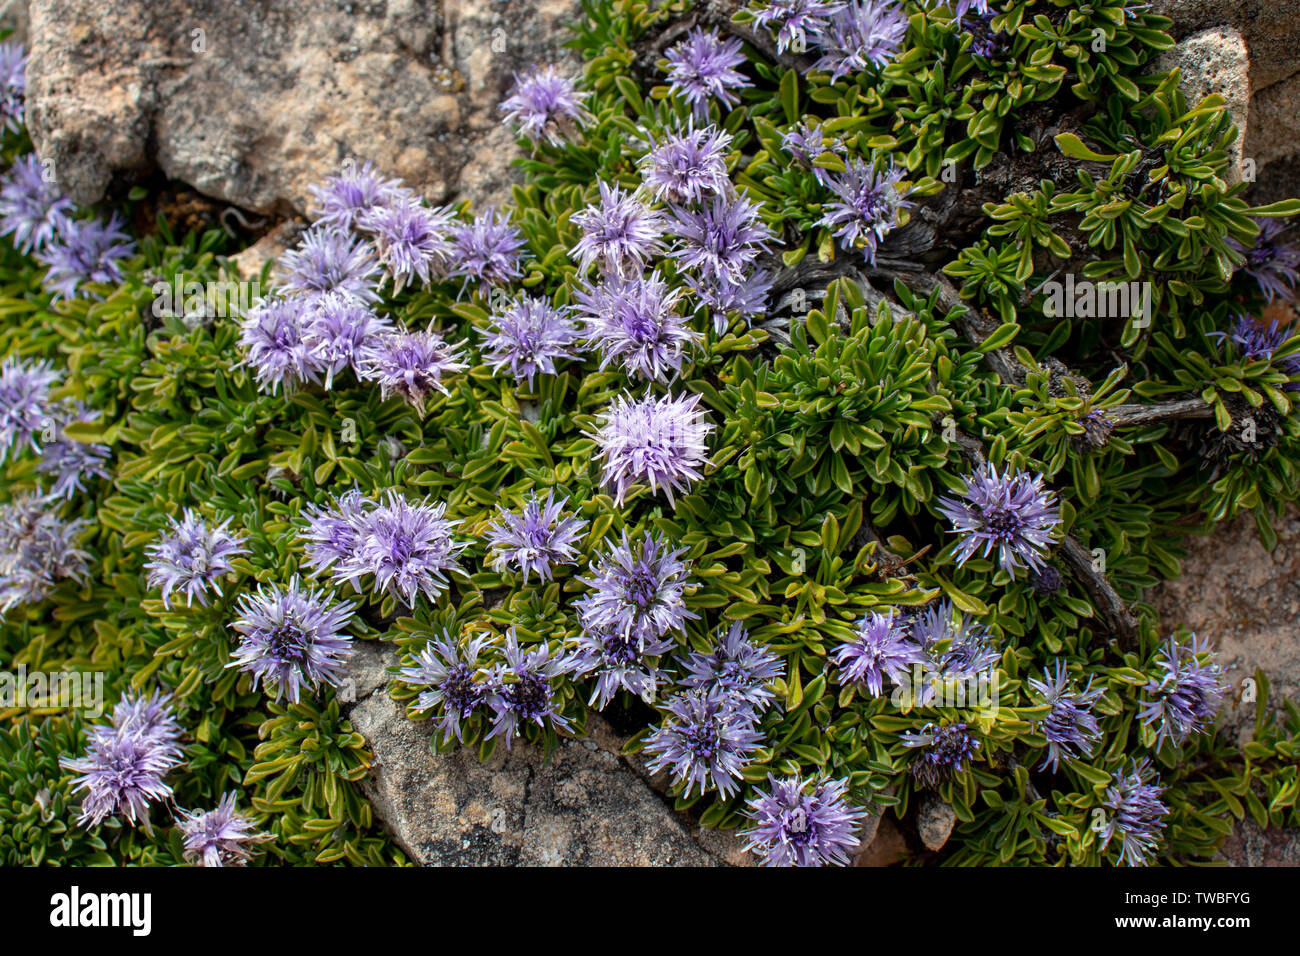 Globularia repens flowering plant covering stone on the mountain meadow. Light violet alpine flowers. Stock Photo